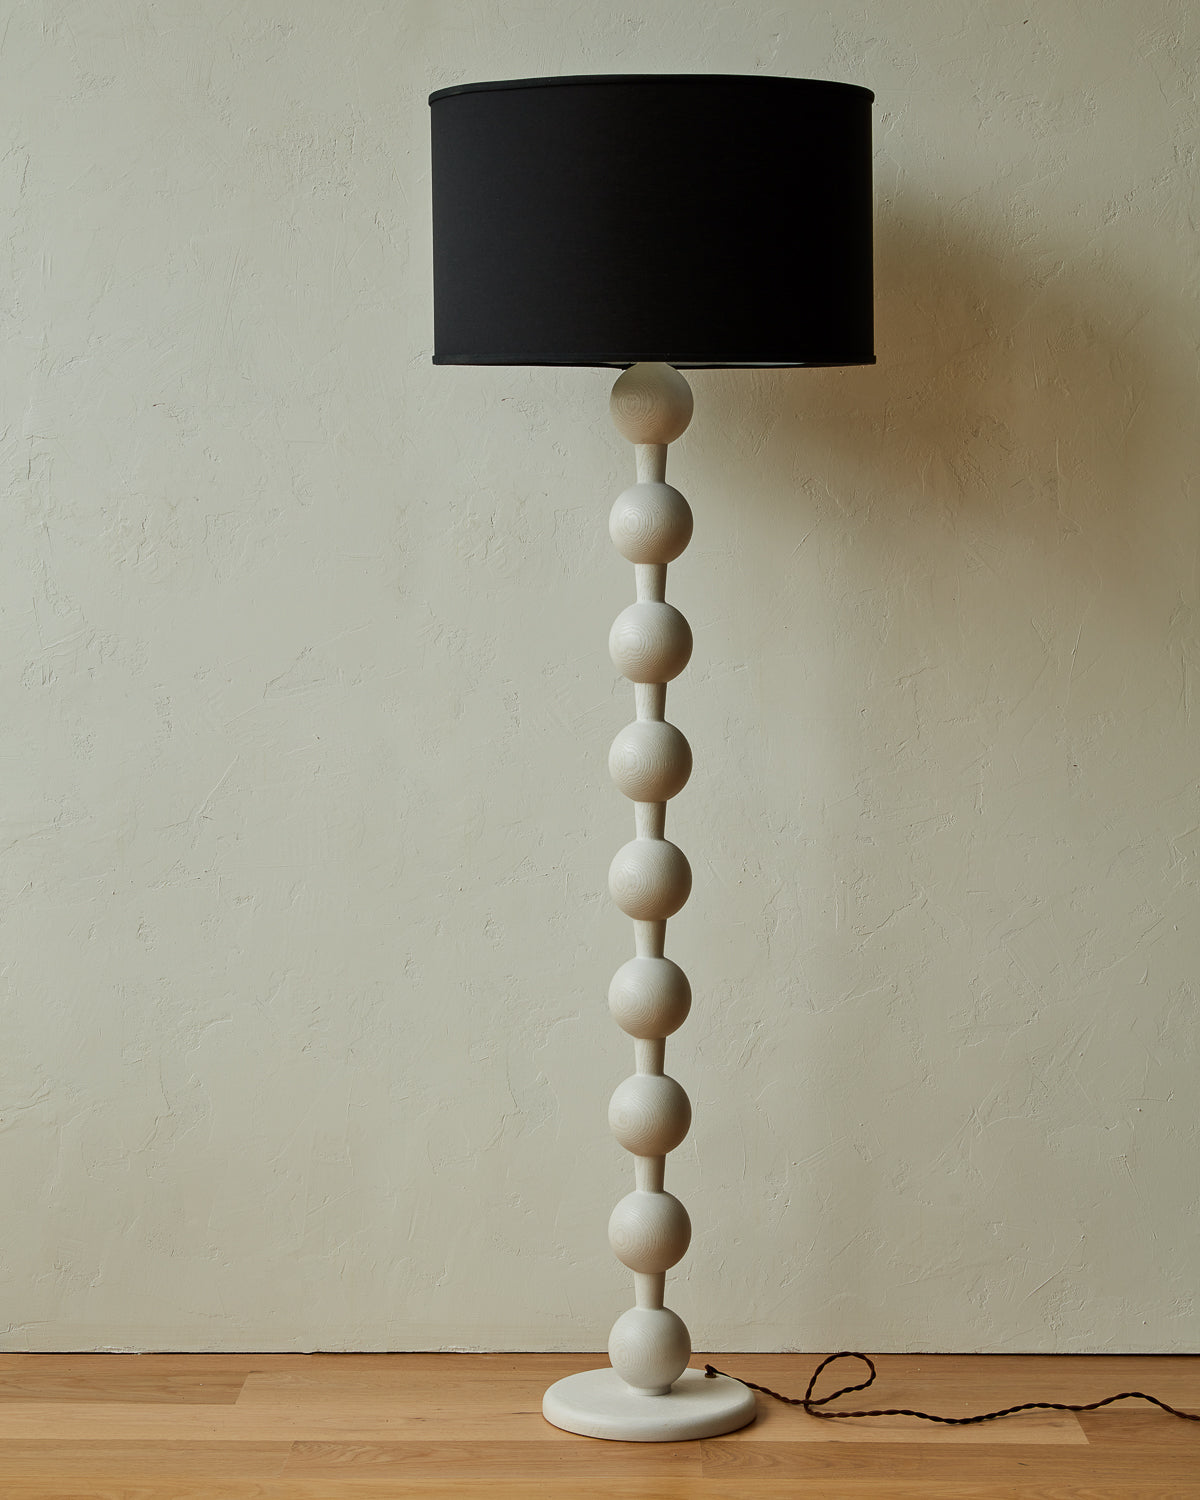 Tall sculptural solid red oak floor lamp with barbell design in white wash finish with black linen drum shade